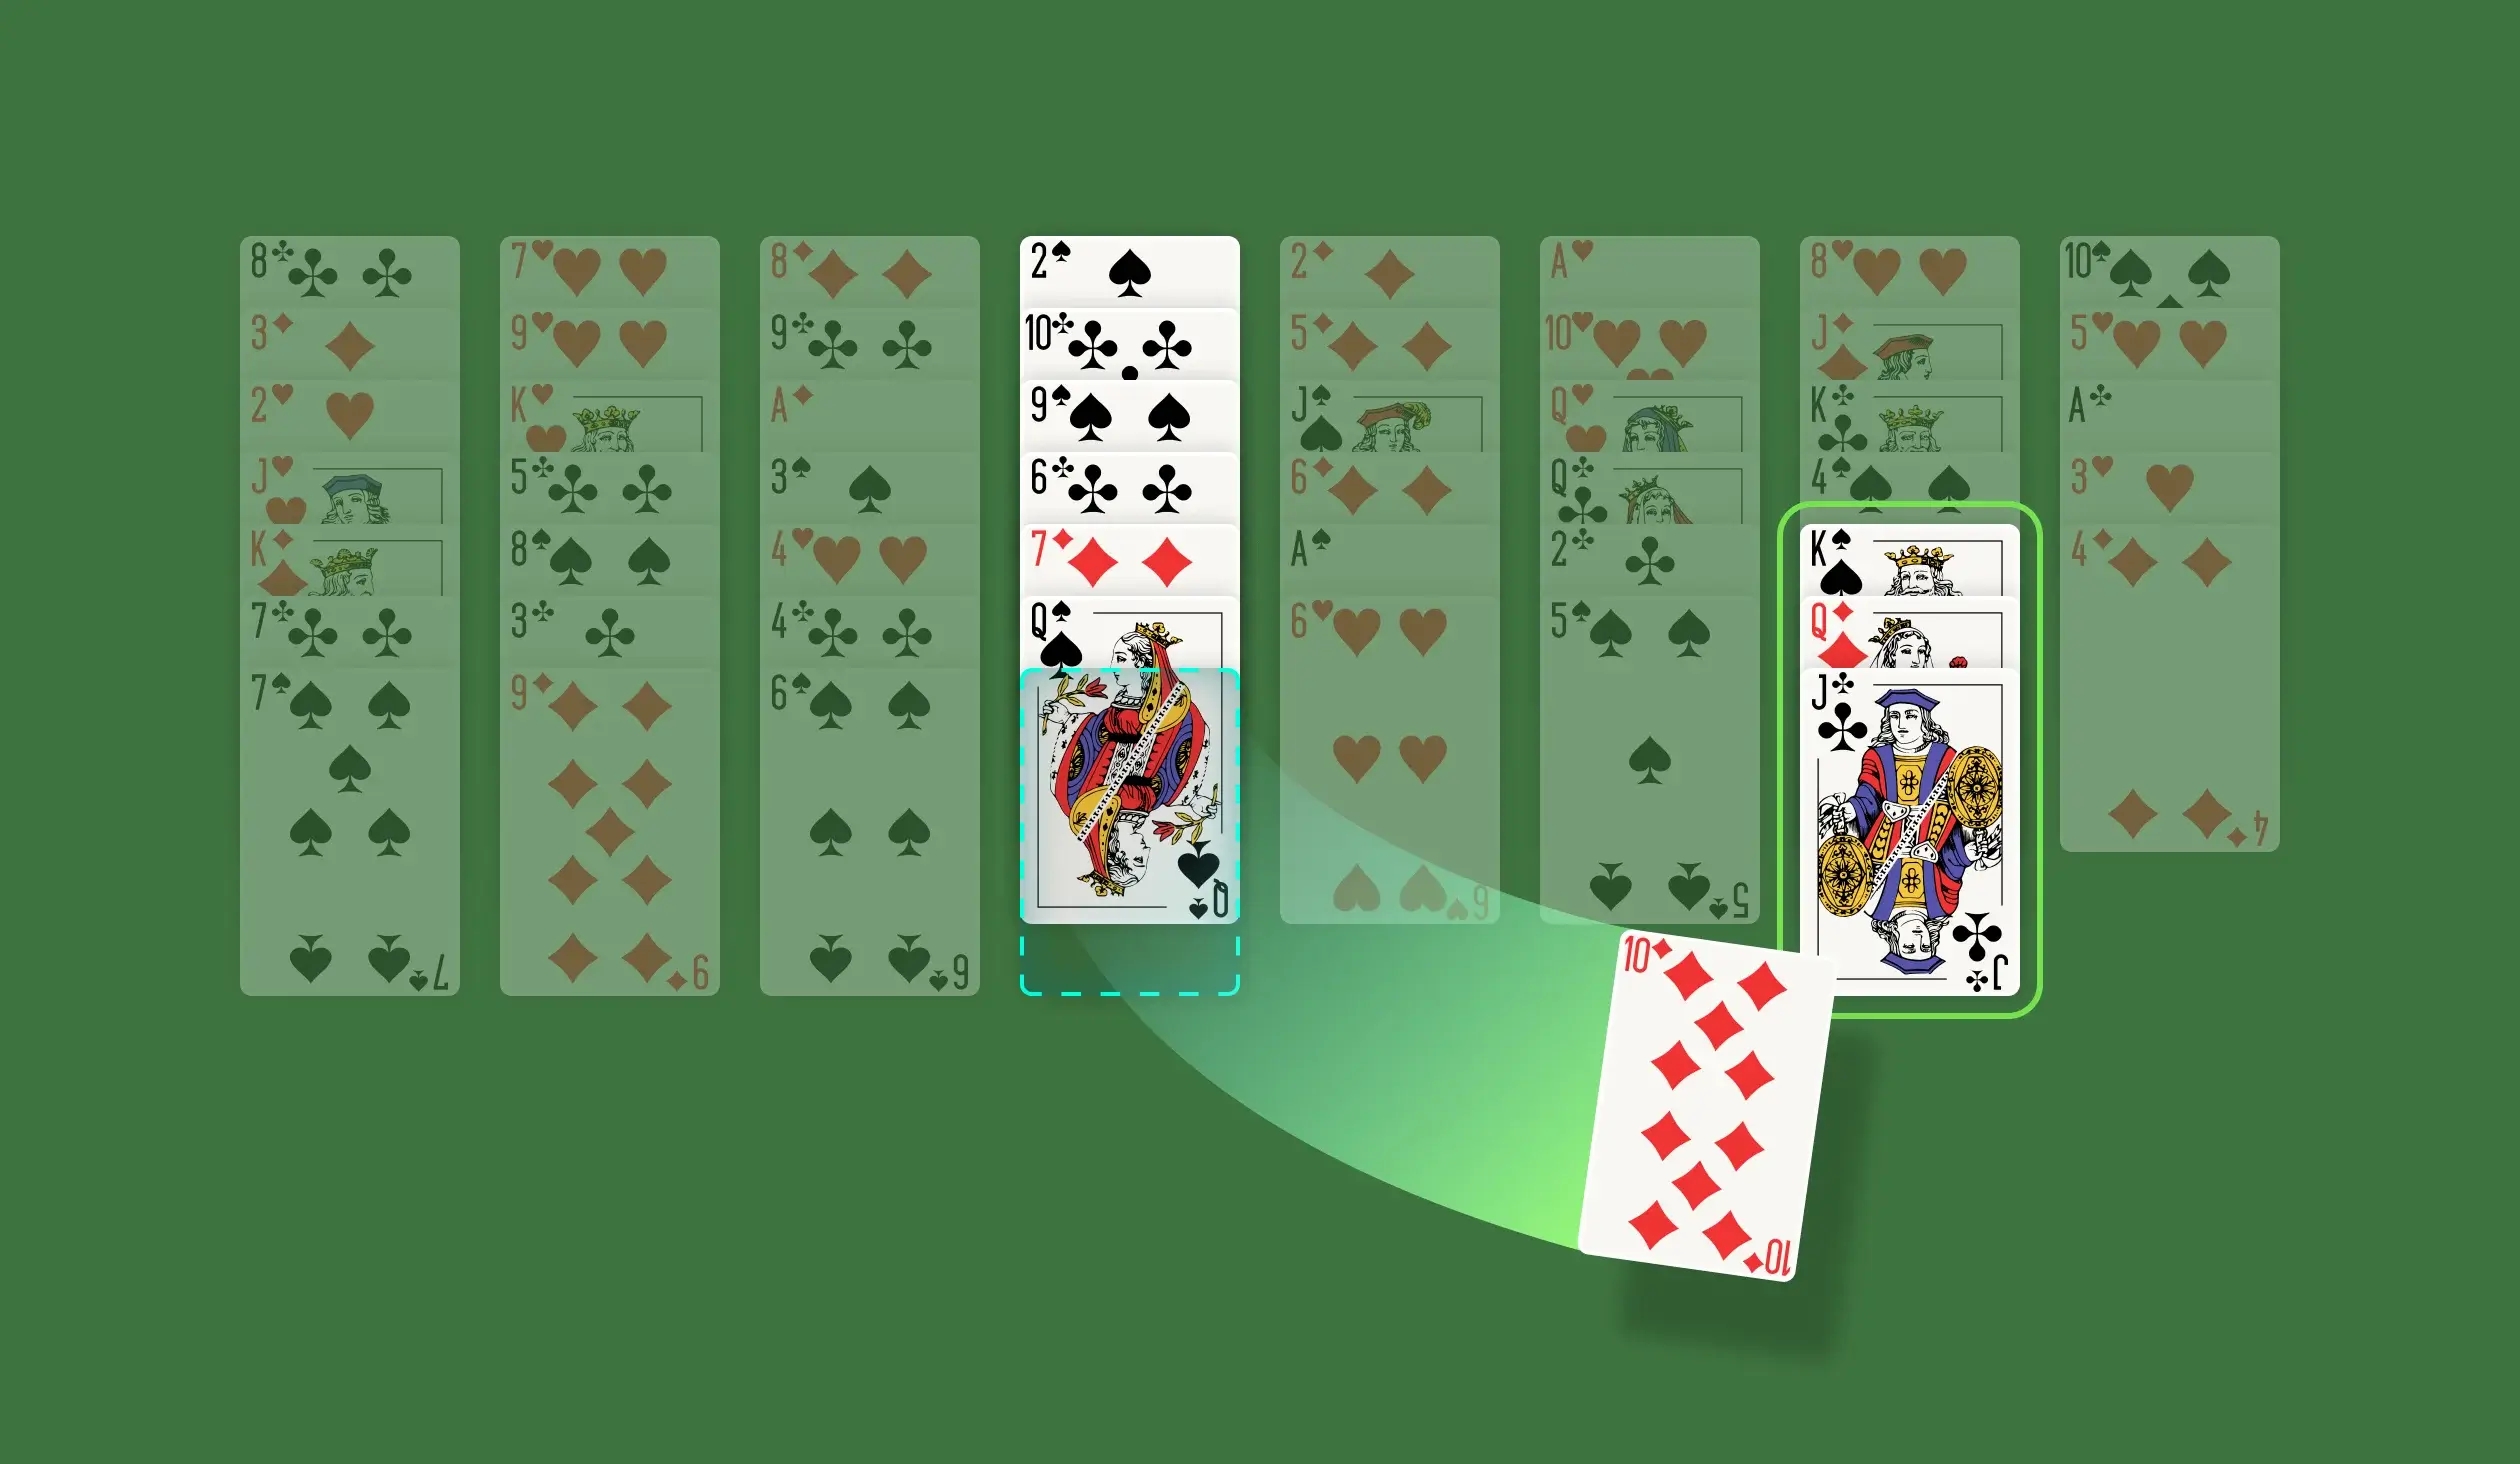 You can move cards around the Tableau columns to free up any cards to complete their suit in the Foundation. Cards in the Tableau columns must be organized in descending order and with alternating colors. You can either move cards by themselves or as a sequence of up to five cards. This limitation adds a fresh challenge to the game, encouraging you to come up with creative solutions. Freeing up a column makes it an additional space to park cards that you want to free up. Use these empty spots wisely!